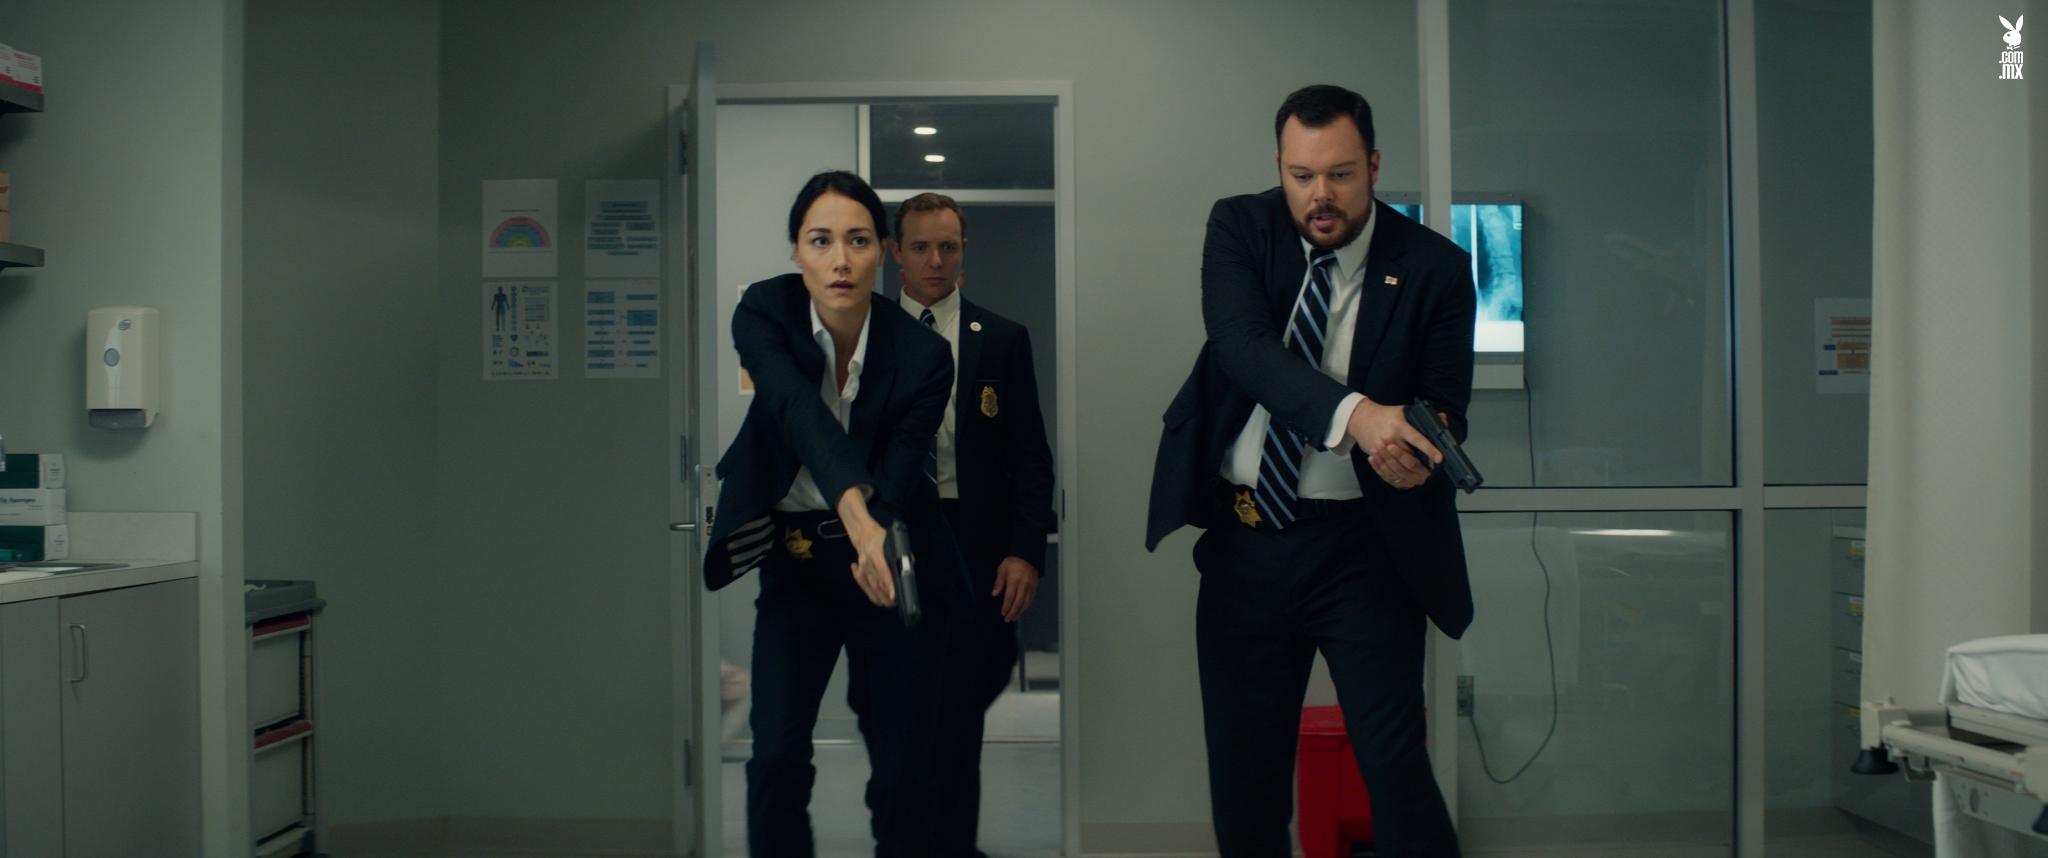 Left to right: Sandrine Holt plays Detective Cheung, Griff Furst plays Agent Burke, and Michael Gladis plays Lieutenant Matias in Terminator Genisys from Paramount Pictures and Skydance Productions.